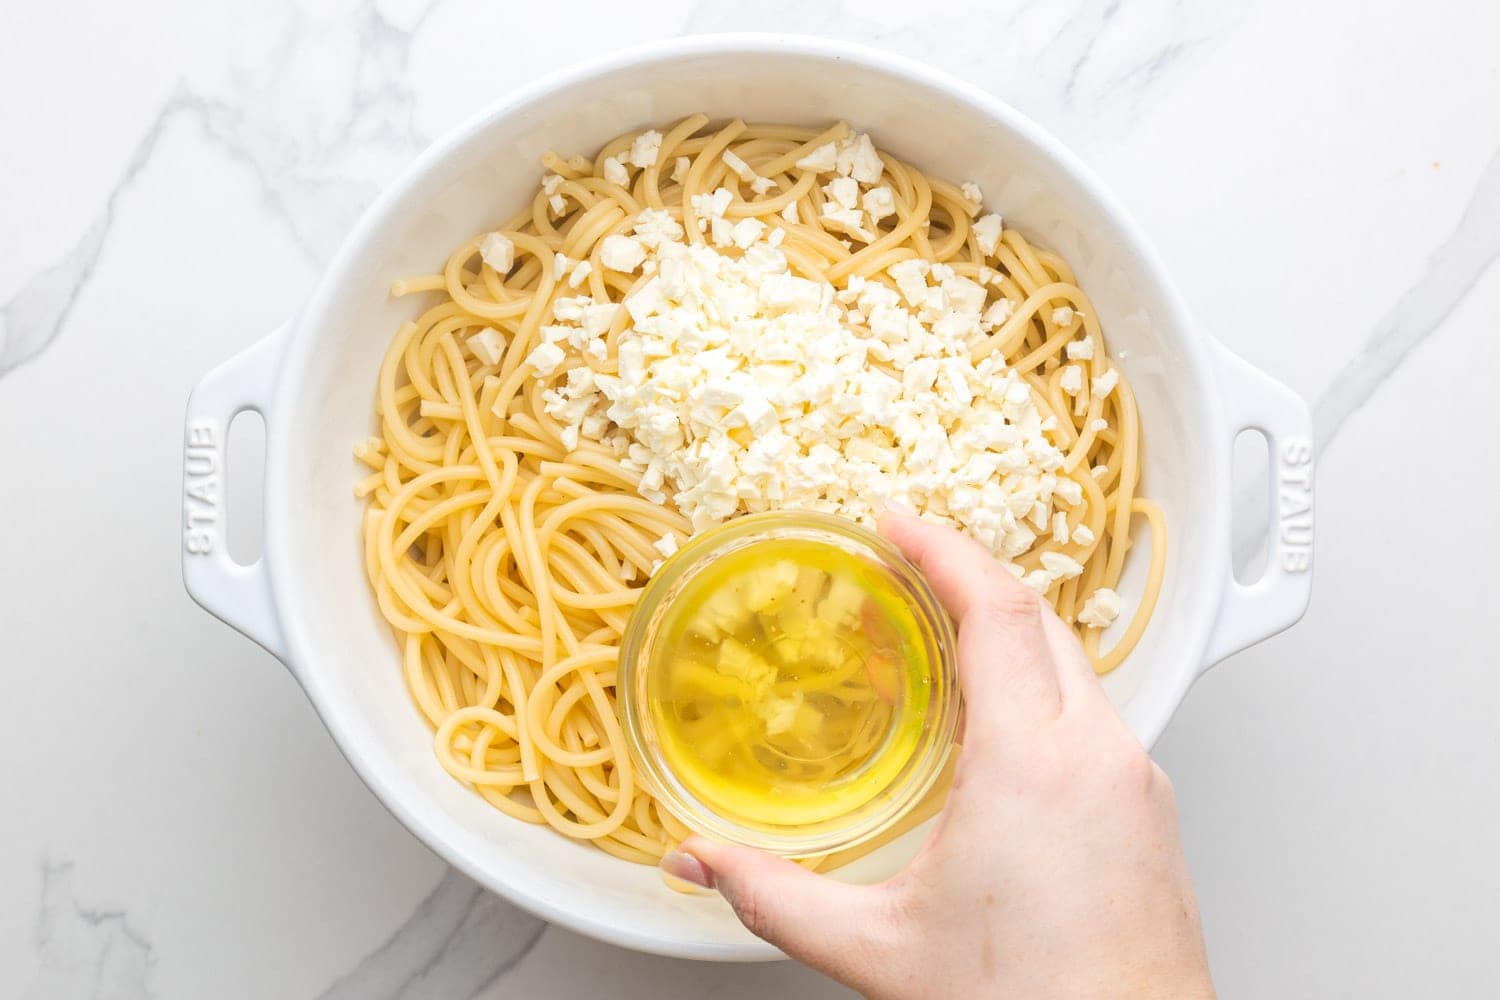 Feta and oil added to cooked Pastitsio pasta in a white mixing bowl.